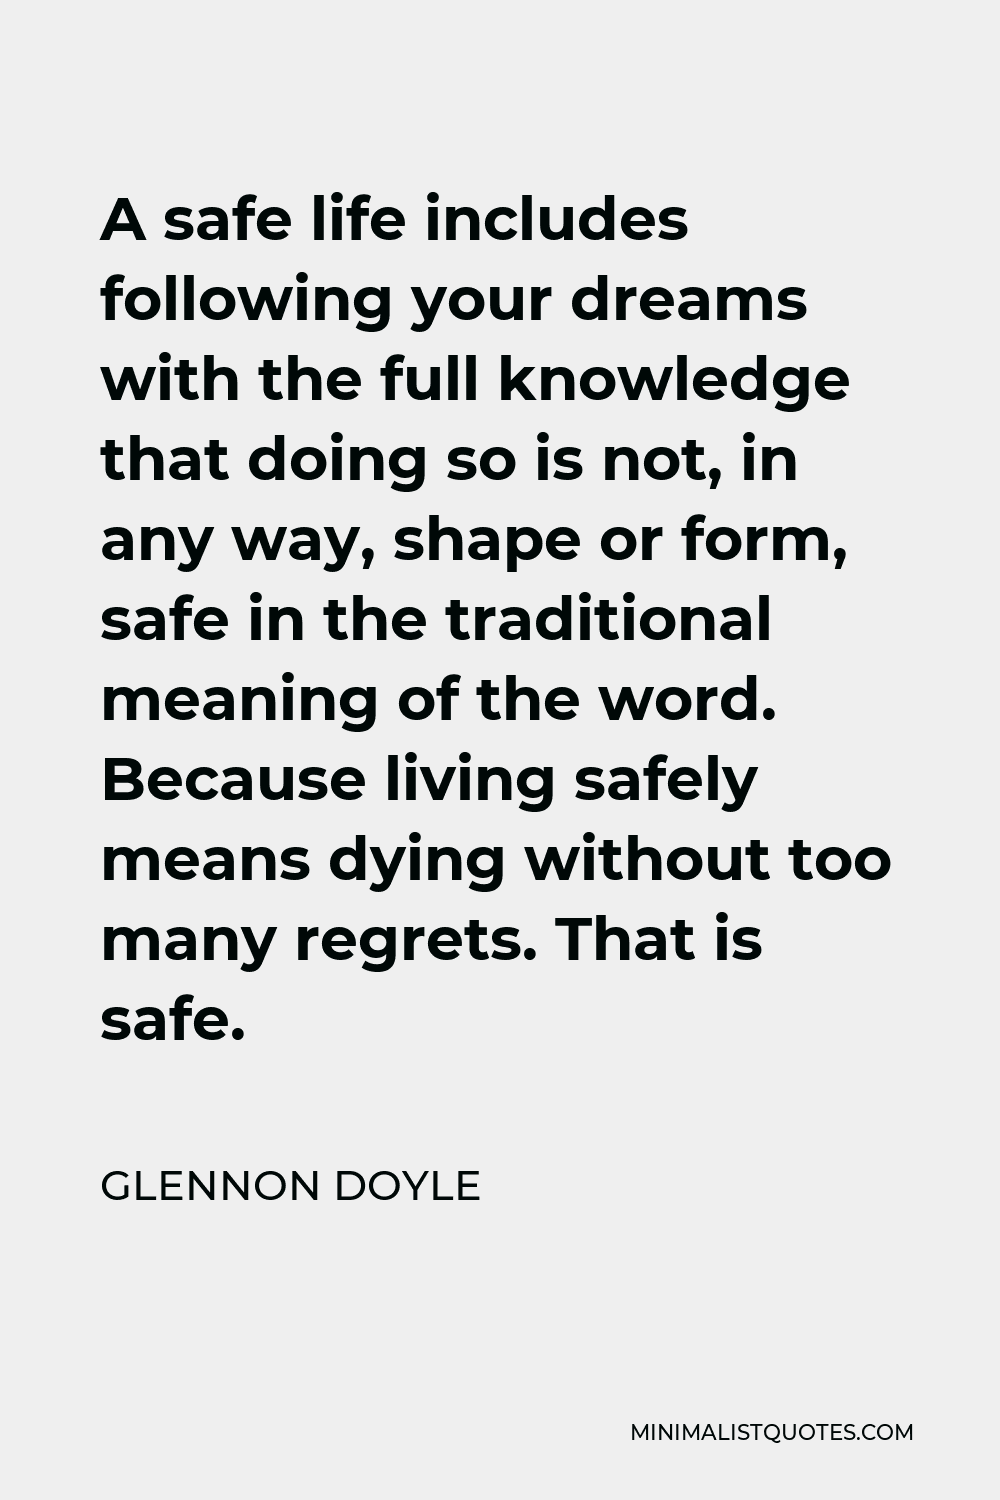 Glennon Doyle Quote: A safe life includes following your dreams ...